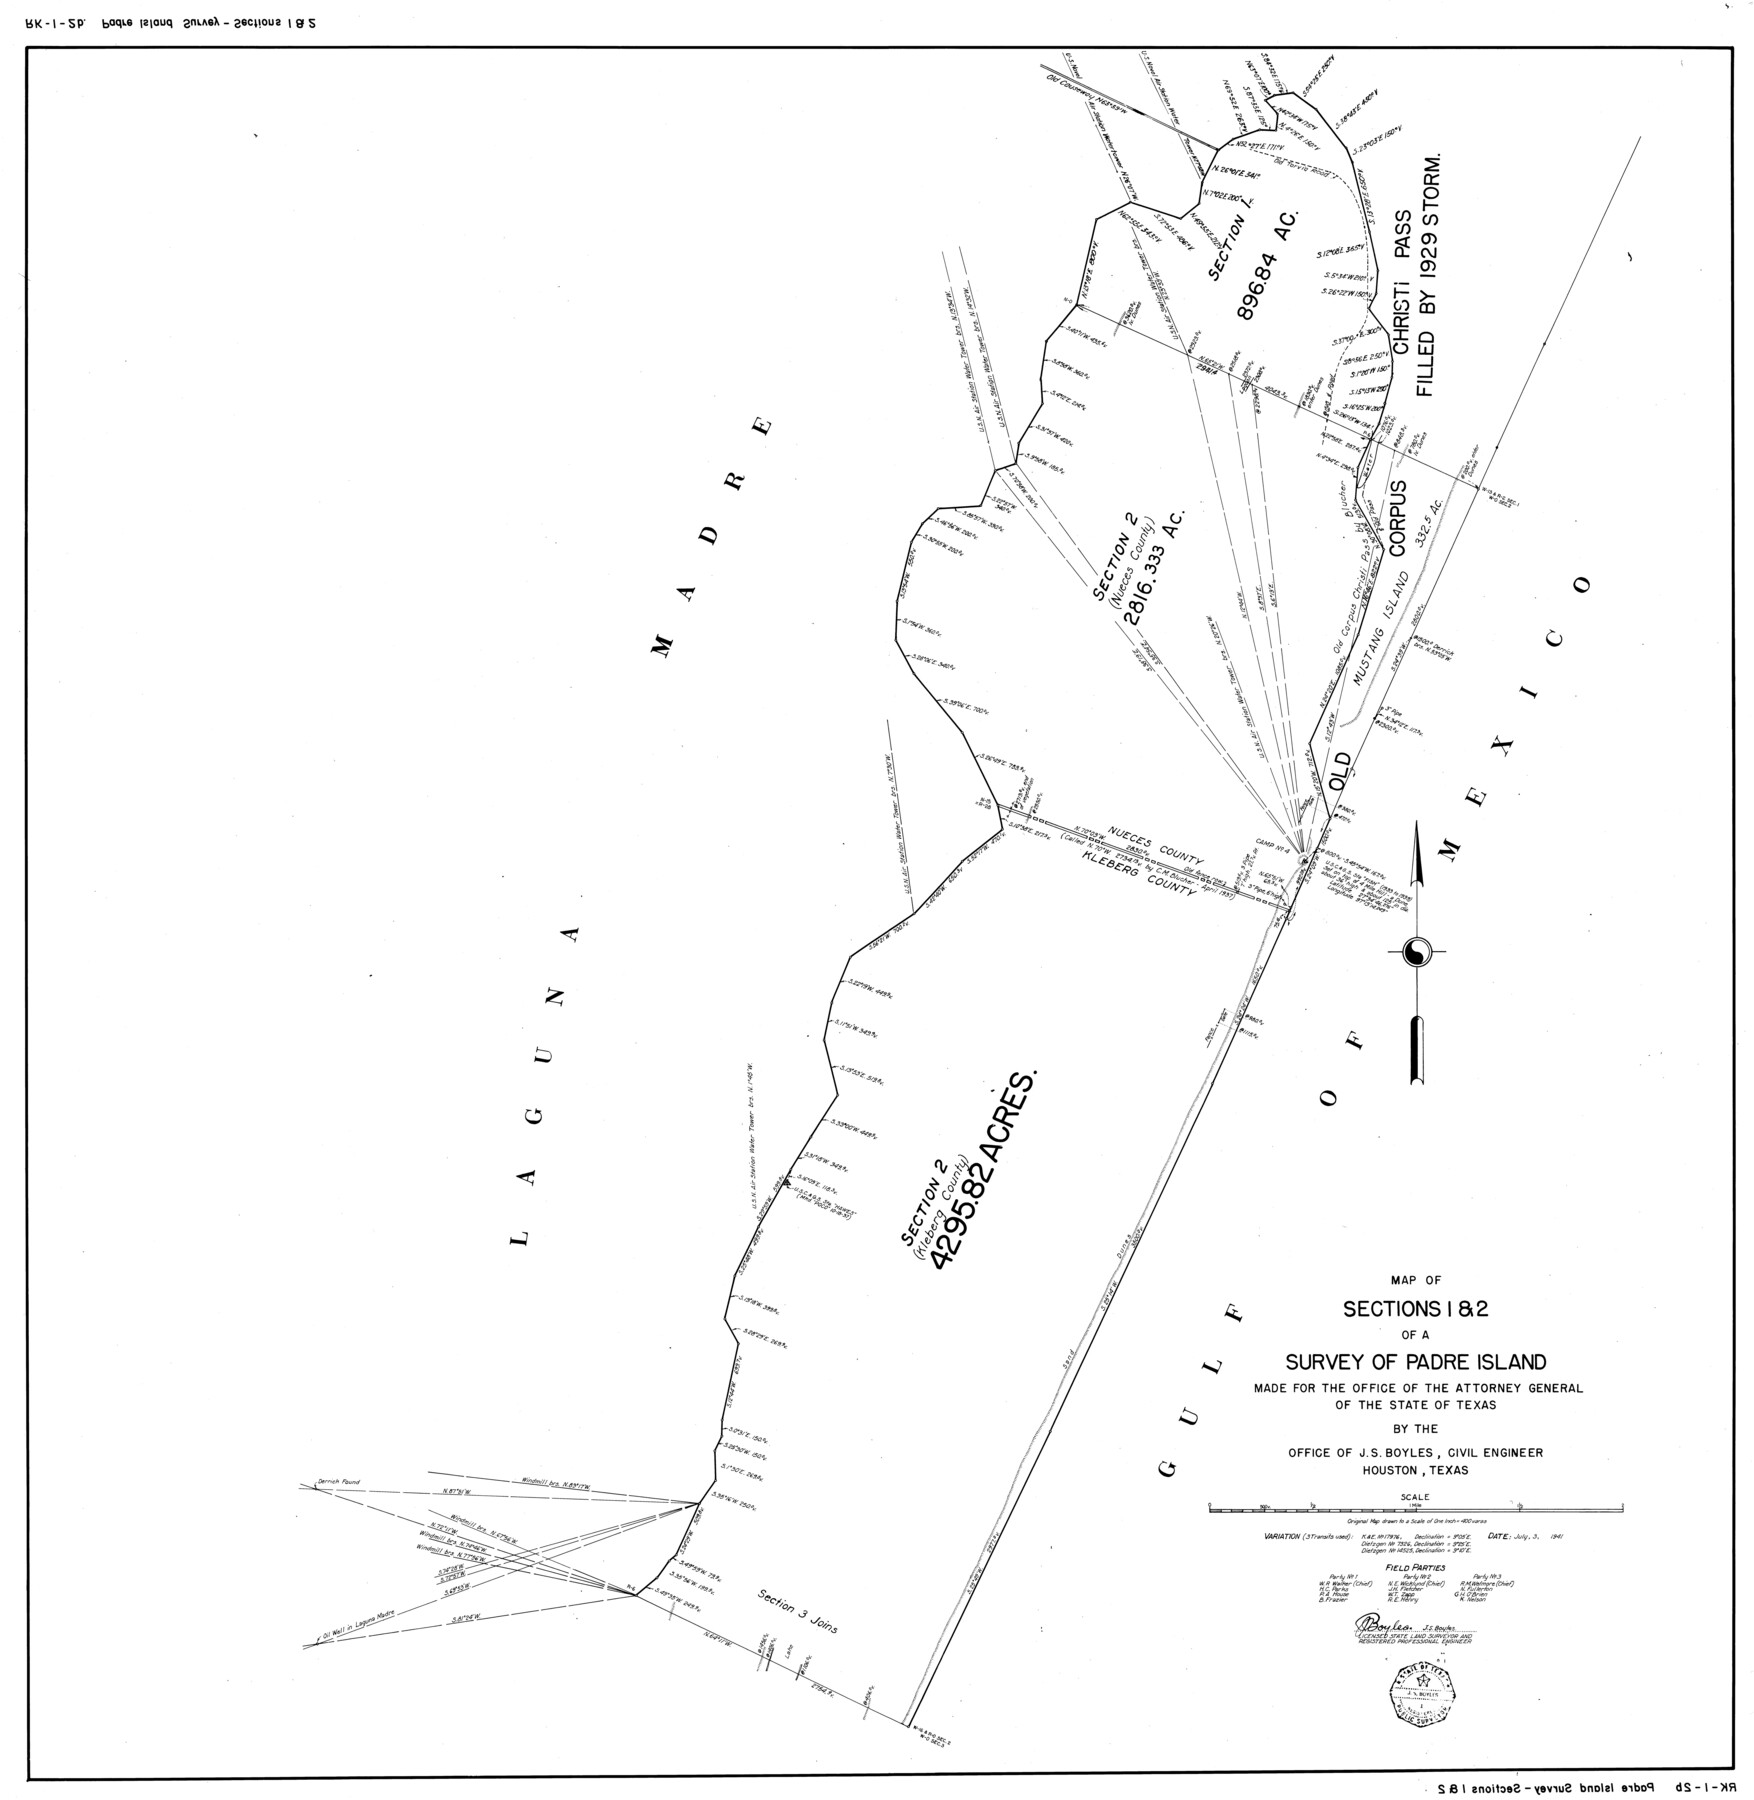 2258, Map of sections 1 & 2 of a survey of Padre Island made for the Office of the Attorney General of the State of Texas, General Map Collection